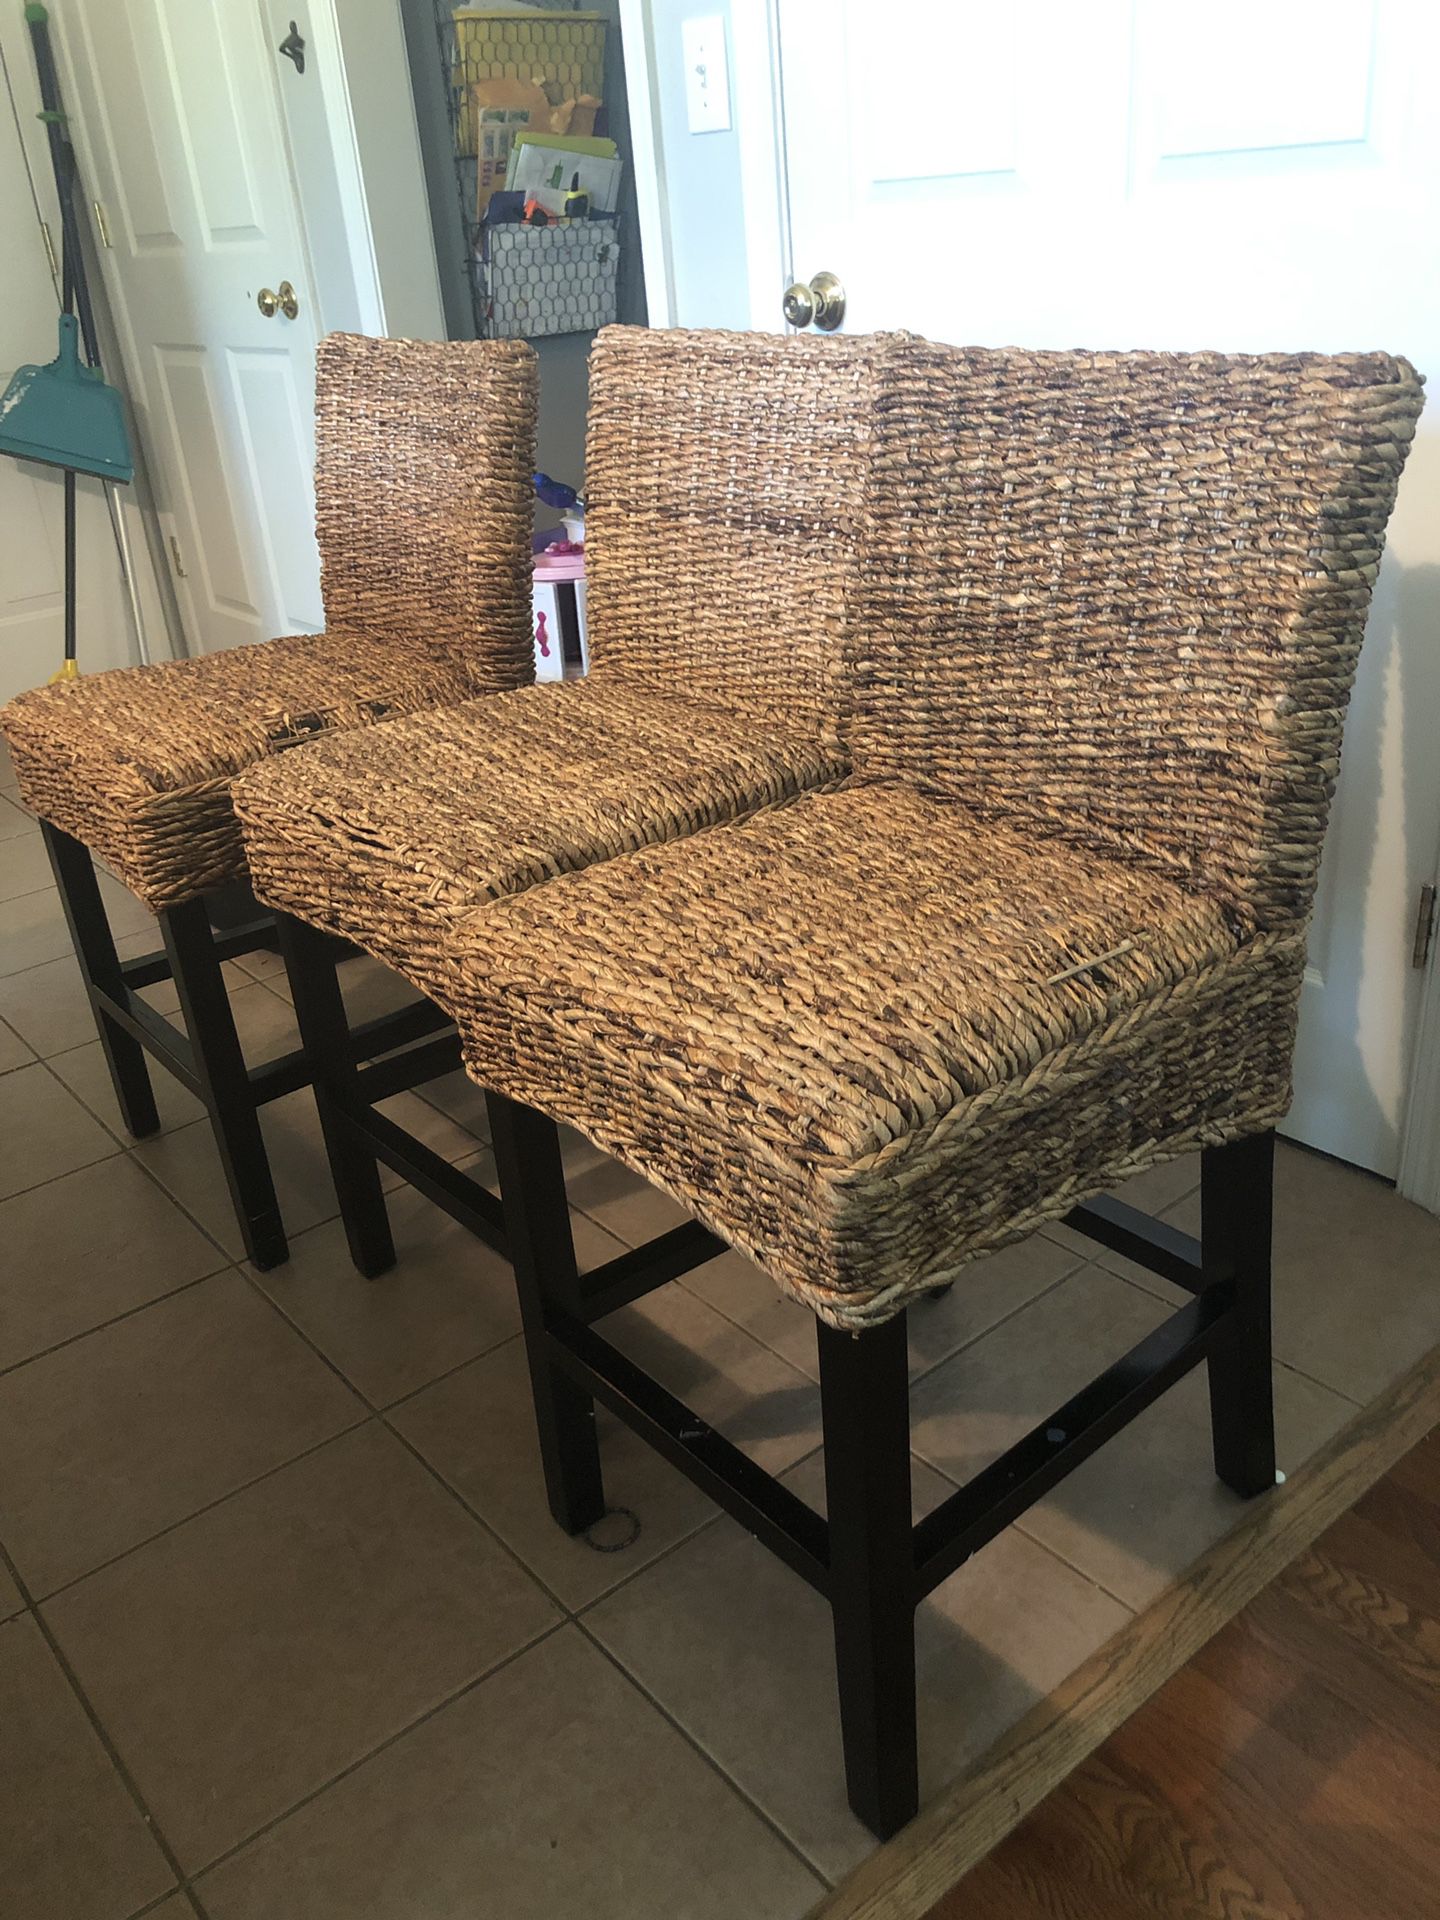 Wicker Chair Stools